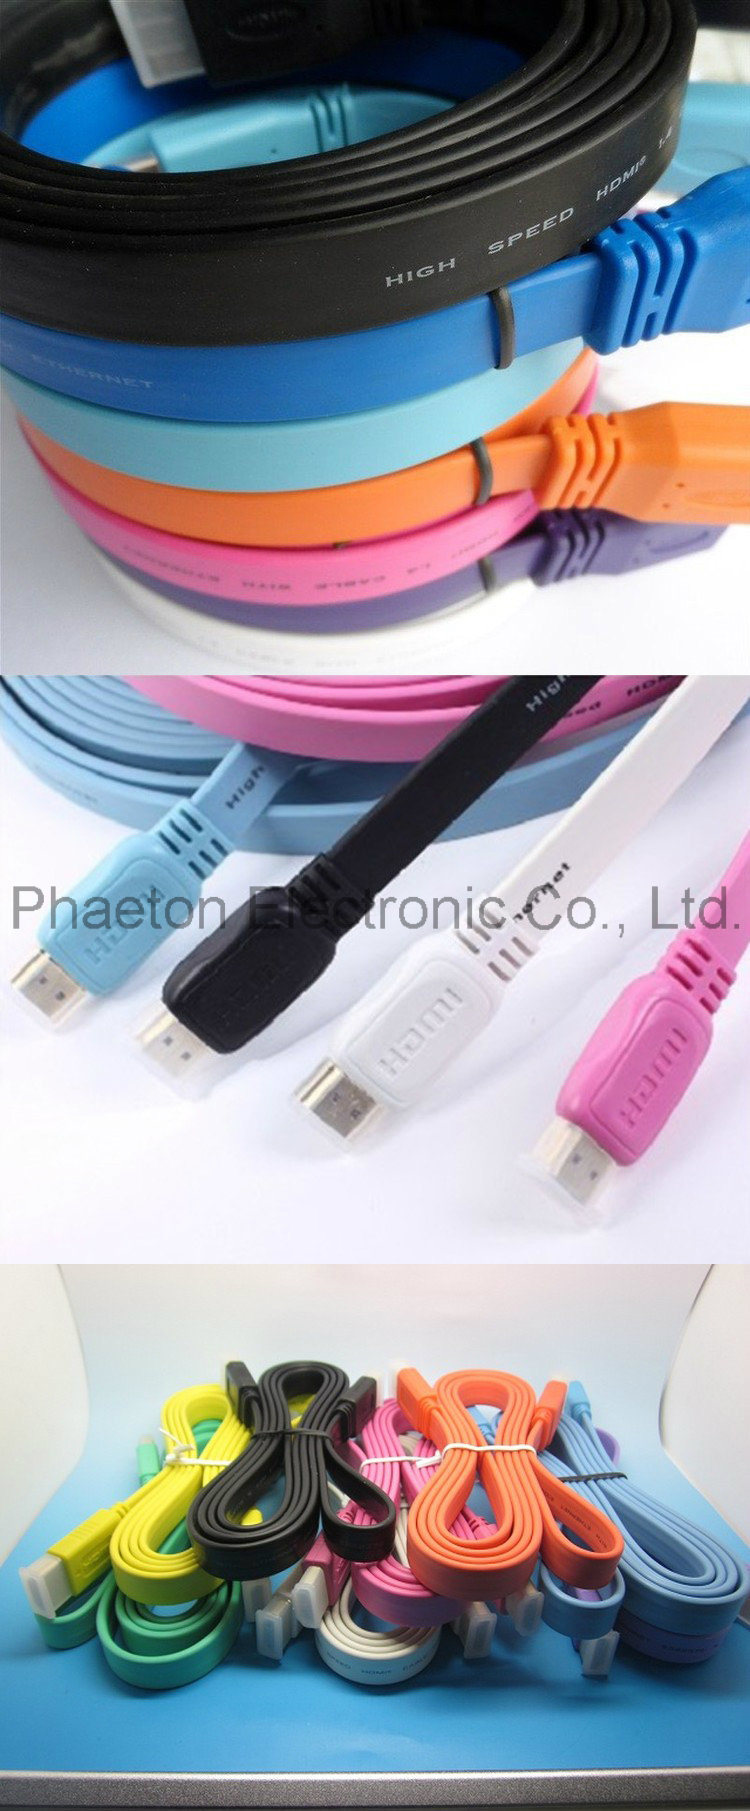 Flat Two Color HDMI Cable in Black for 1.4V (pH6-1205)